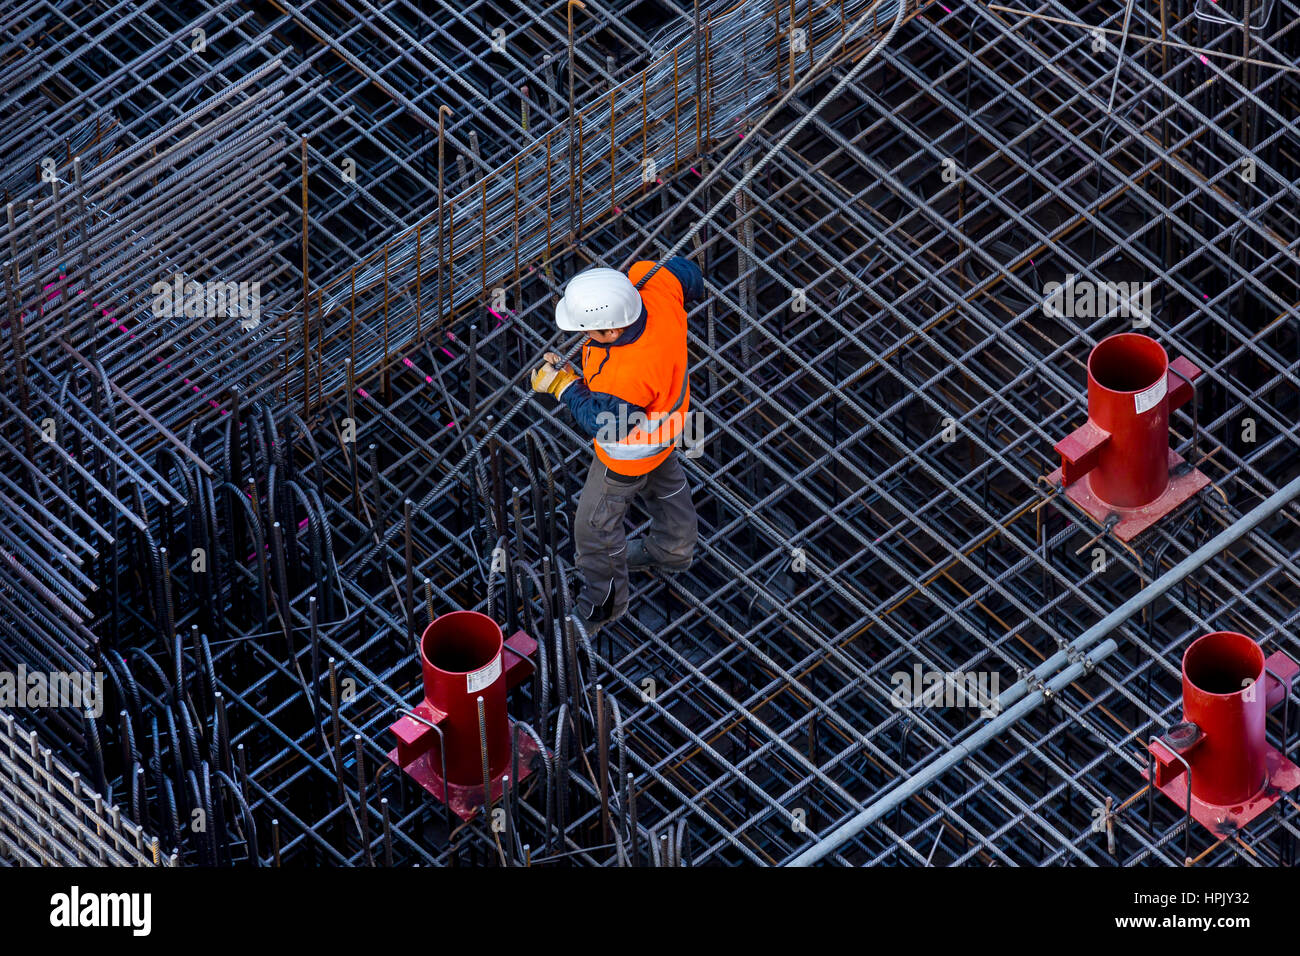 Construction workers processing reinforcing steel for reinforced concrete ceiling, Bavaria, Germany Stock Photo